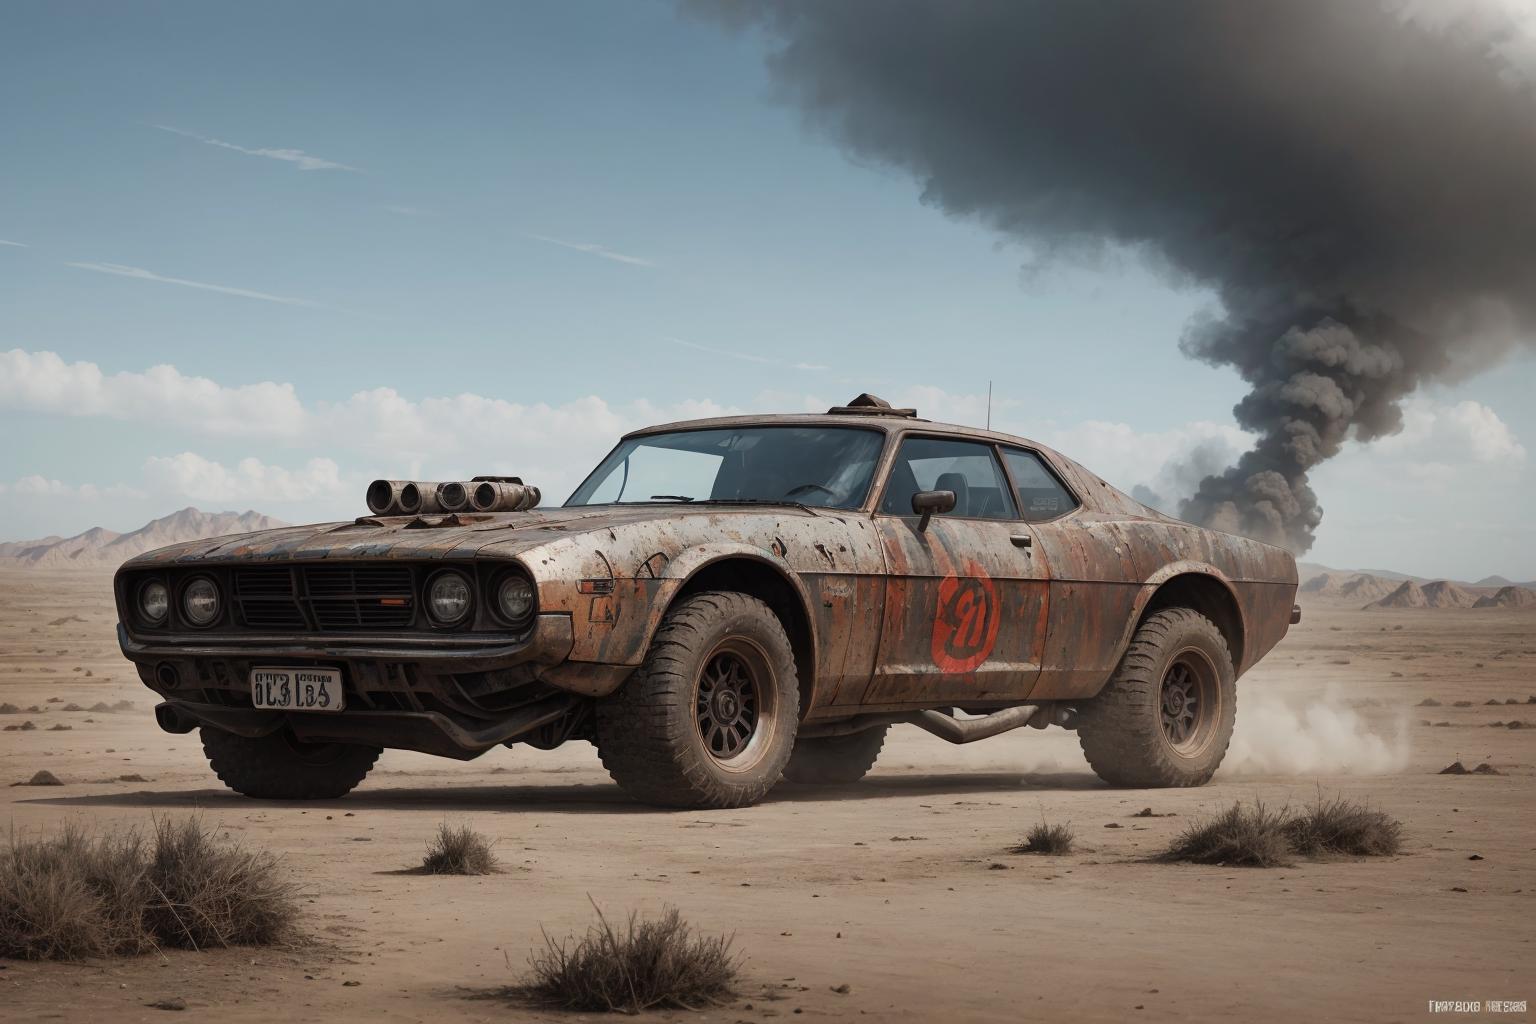 A rusty car with flames painted on the hood and a number 13 on the door, driving on a dirt road in a barren environment.